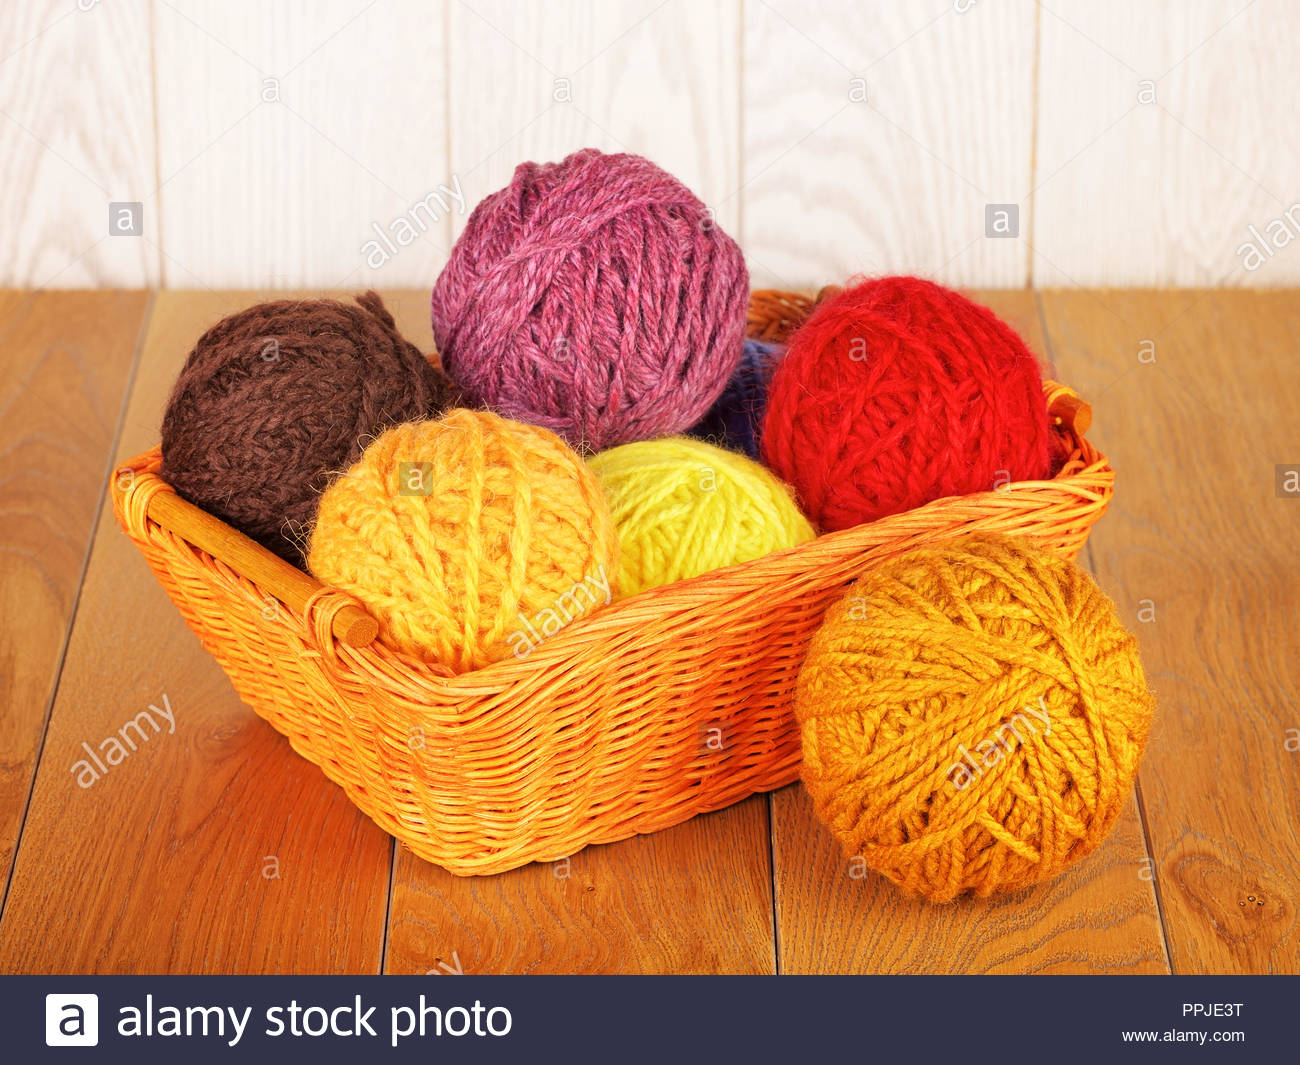 Colorful Yarn Balls In Wicker Basket On Wooden Background Stock